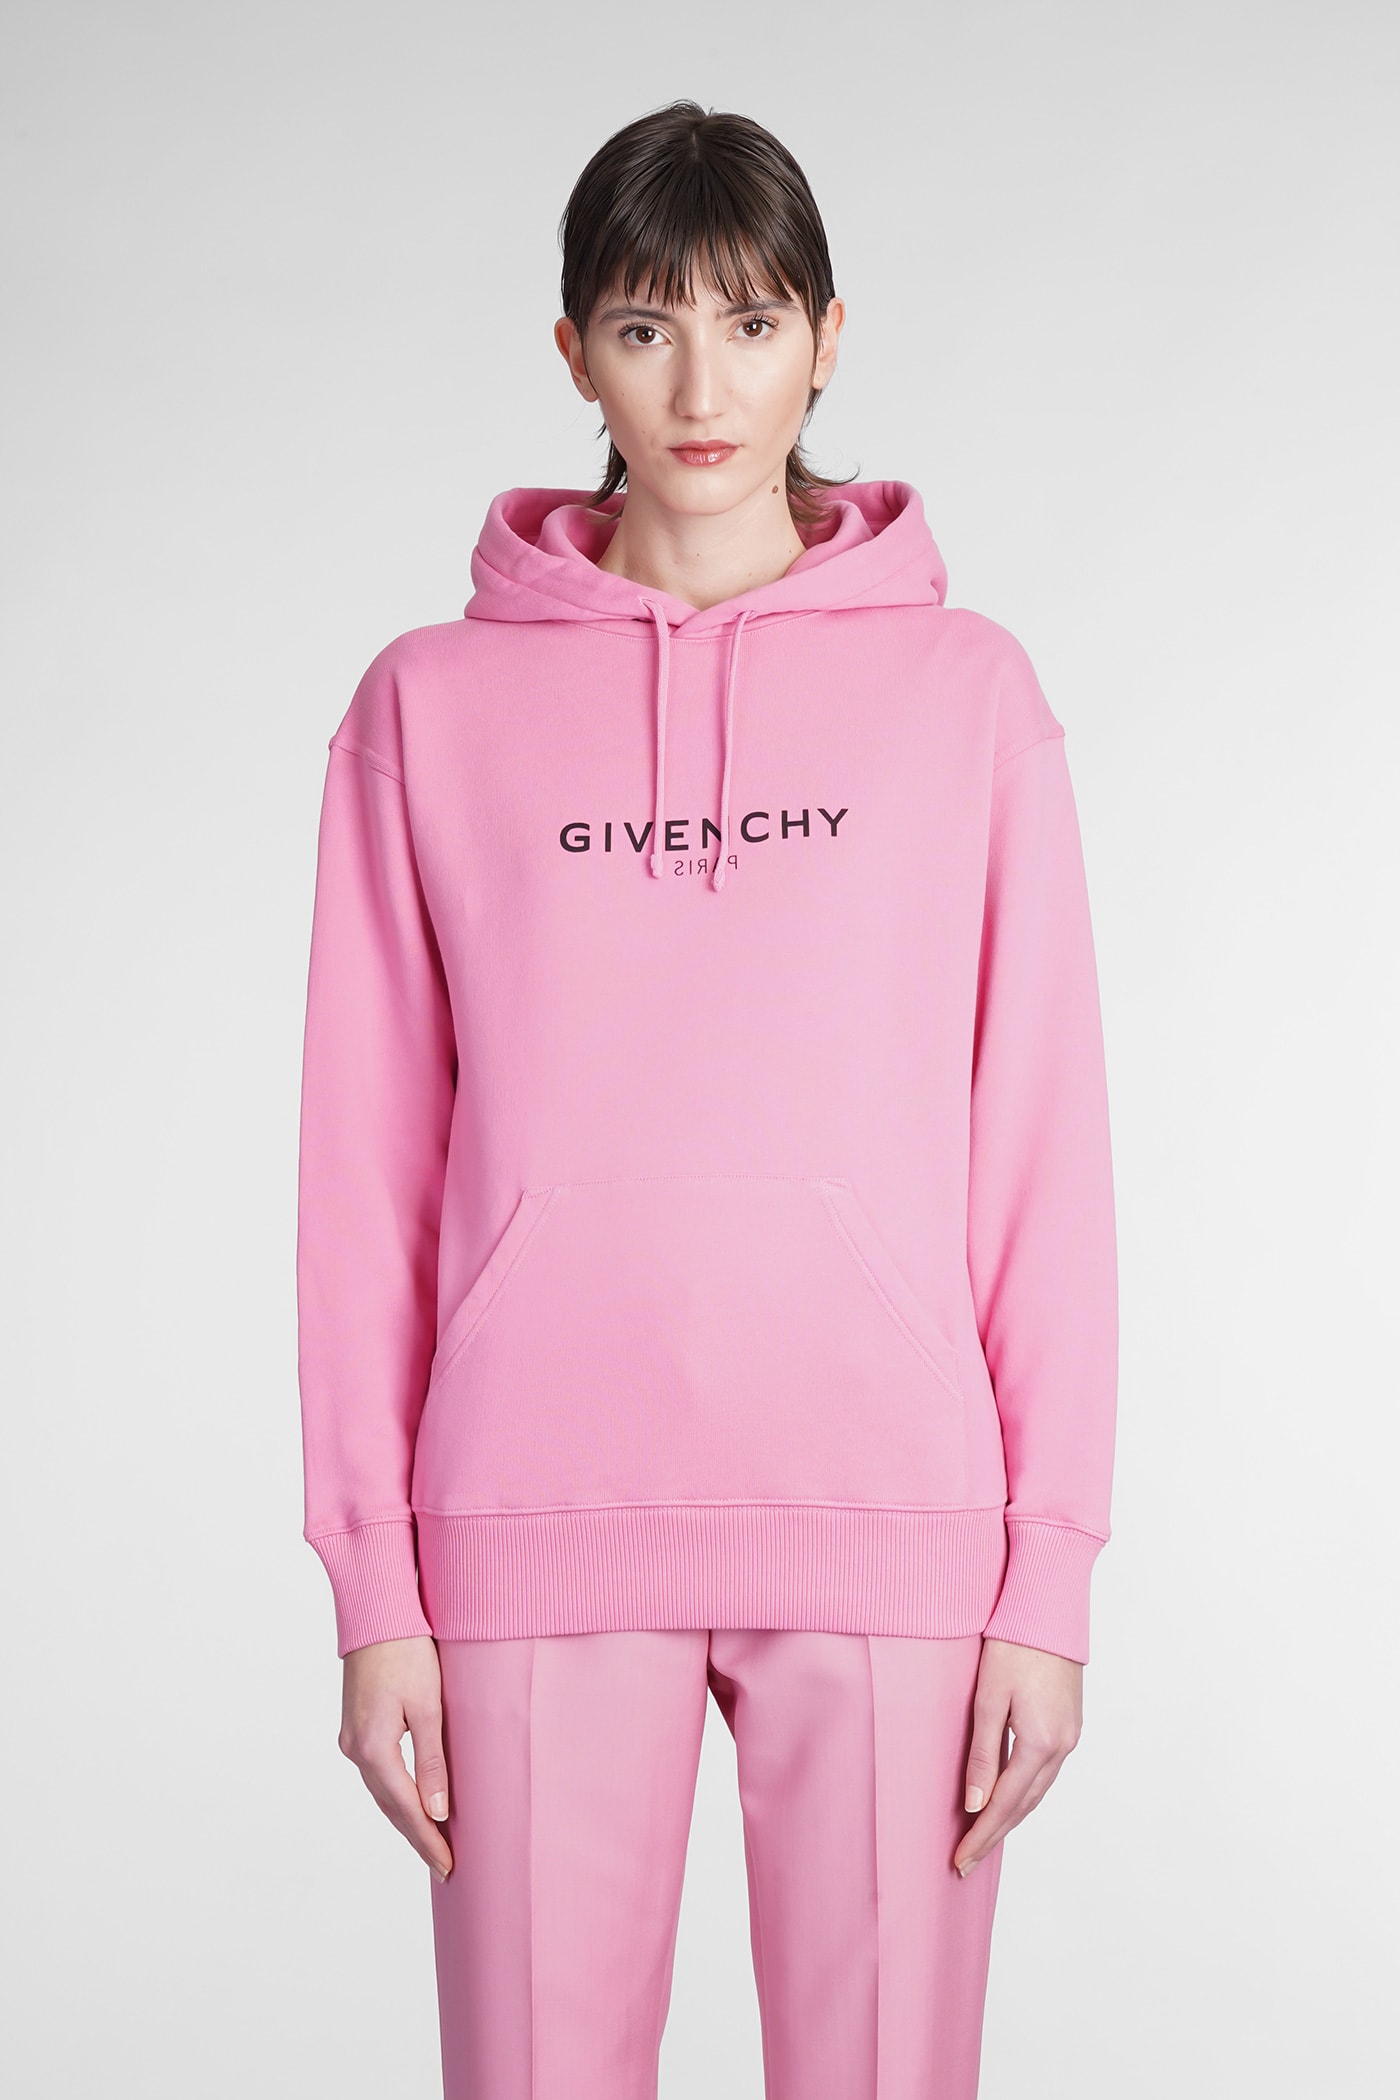 GIVENCHY SWEATSHIRT IN ROSE-PINK COTTON